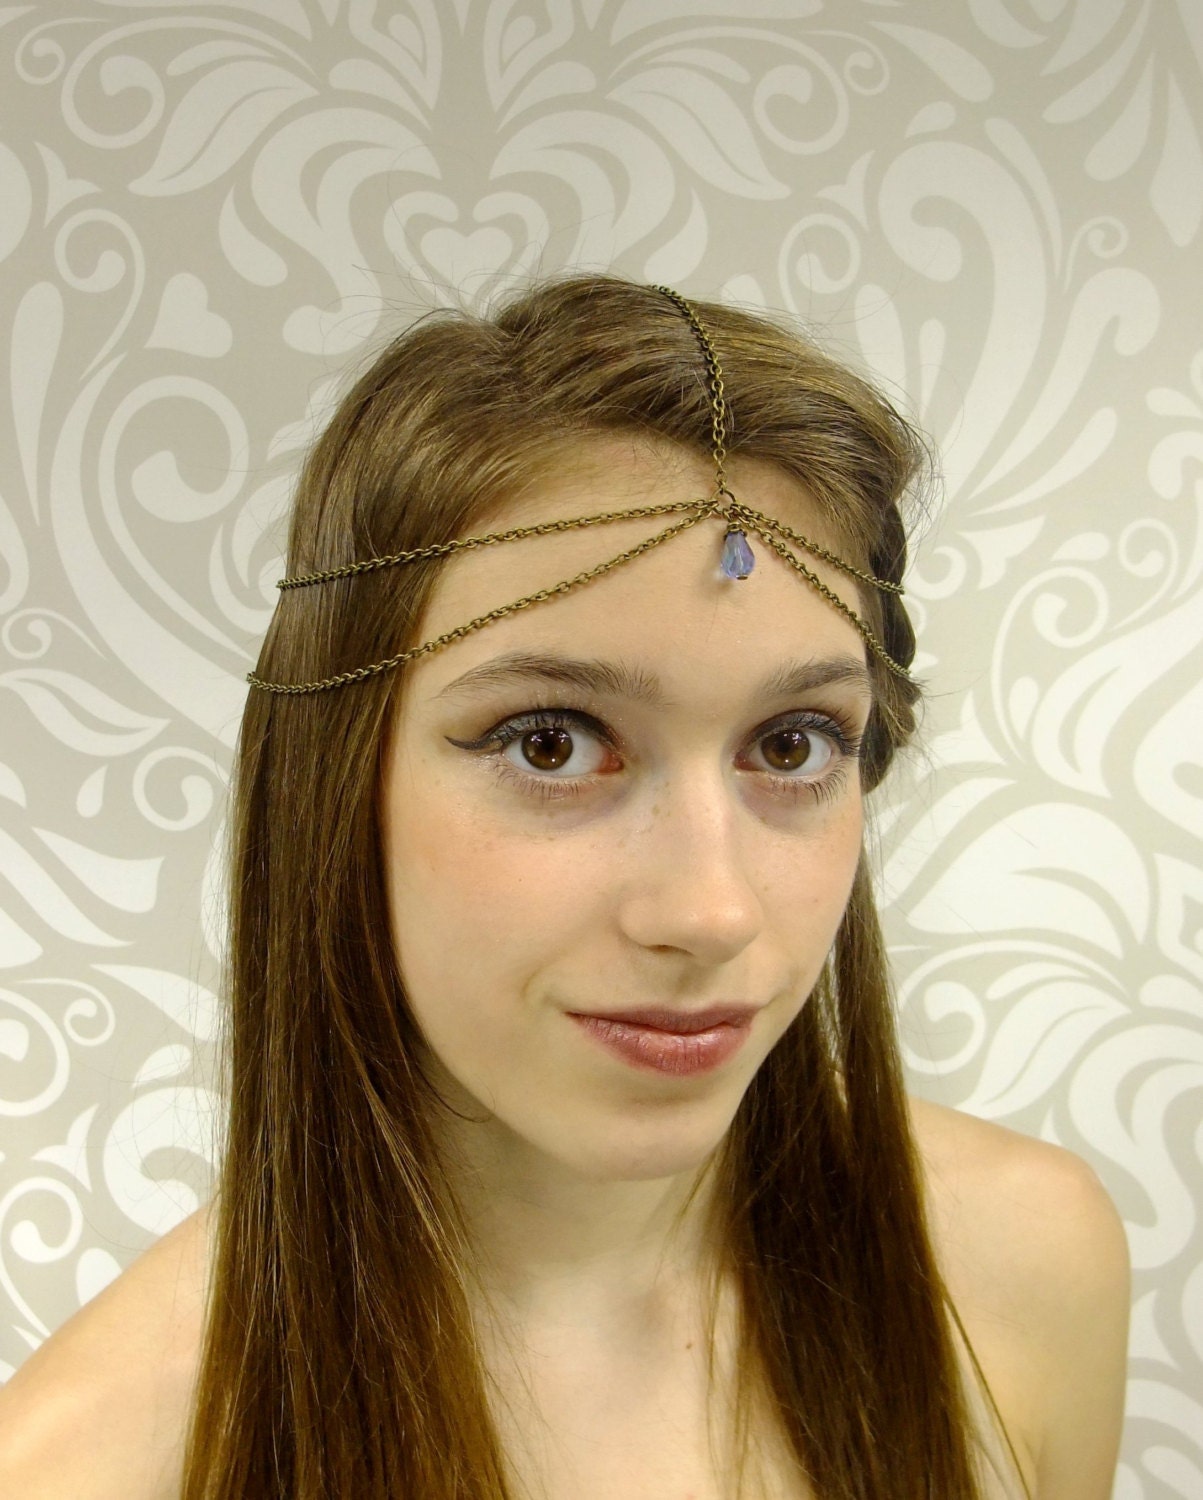 Antiqued Brass and Periwinkle Headchain Free USA Shipping - Etsy